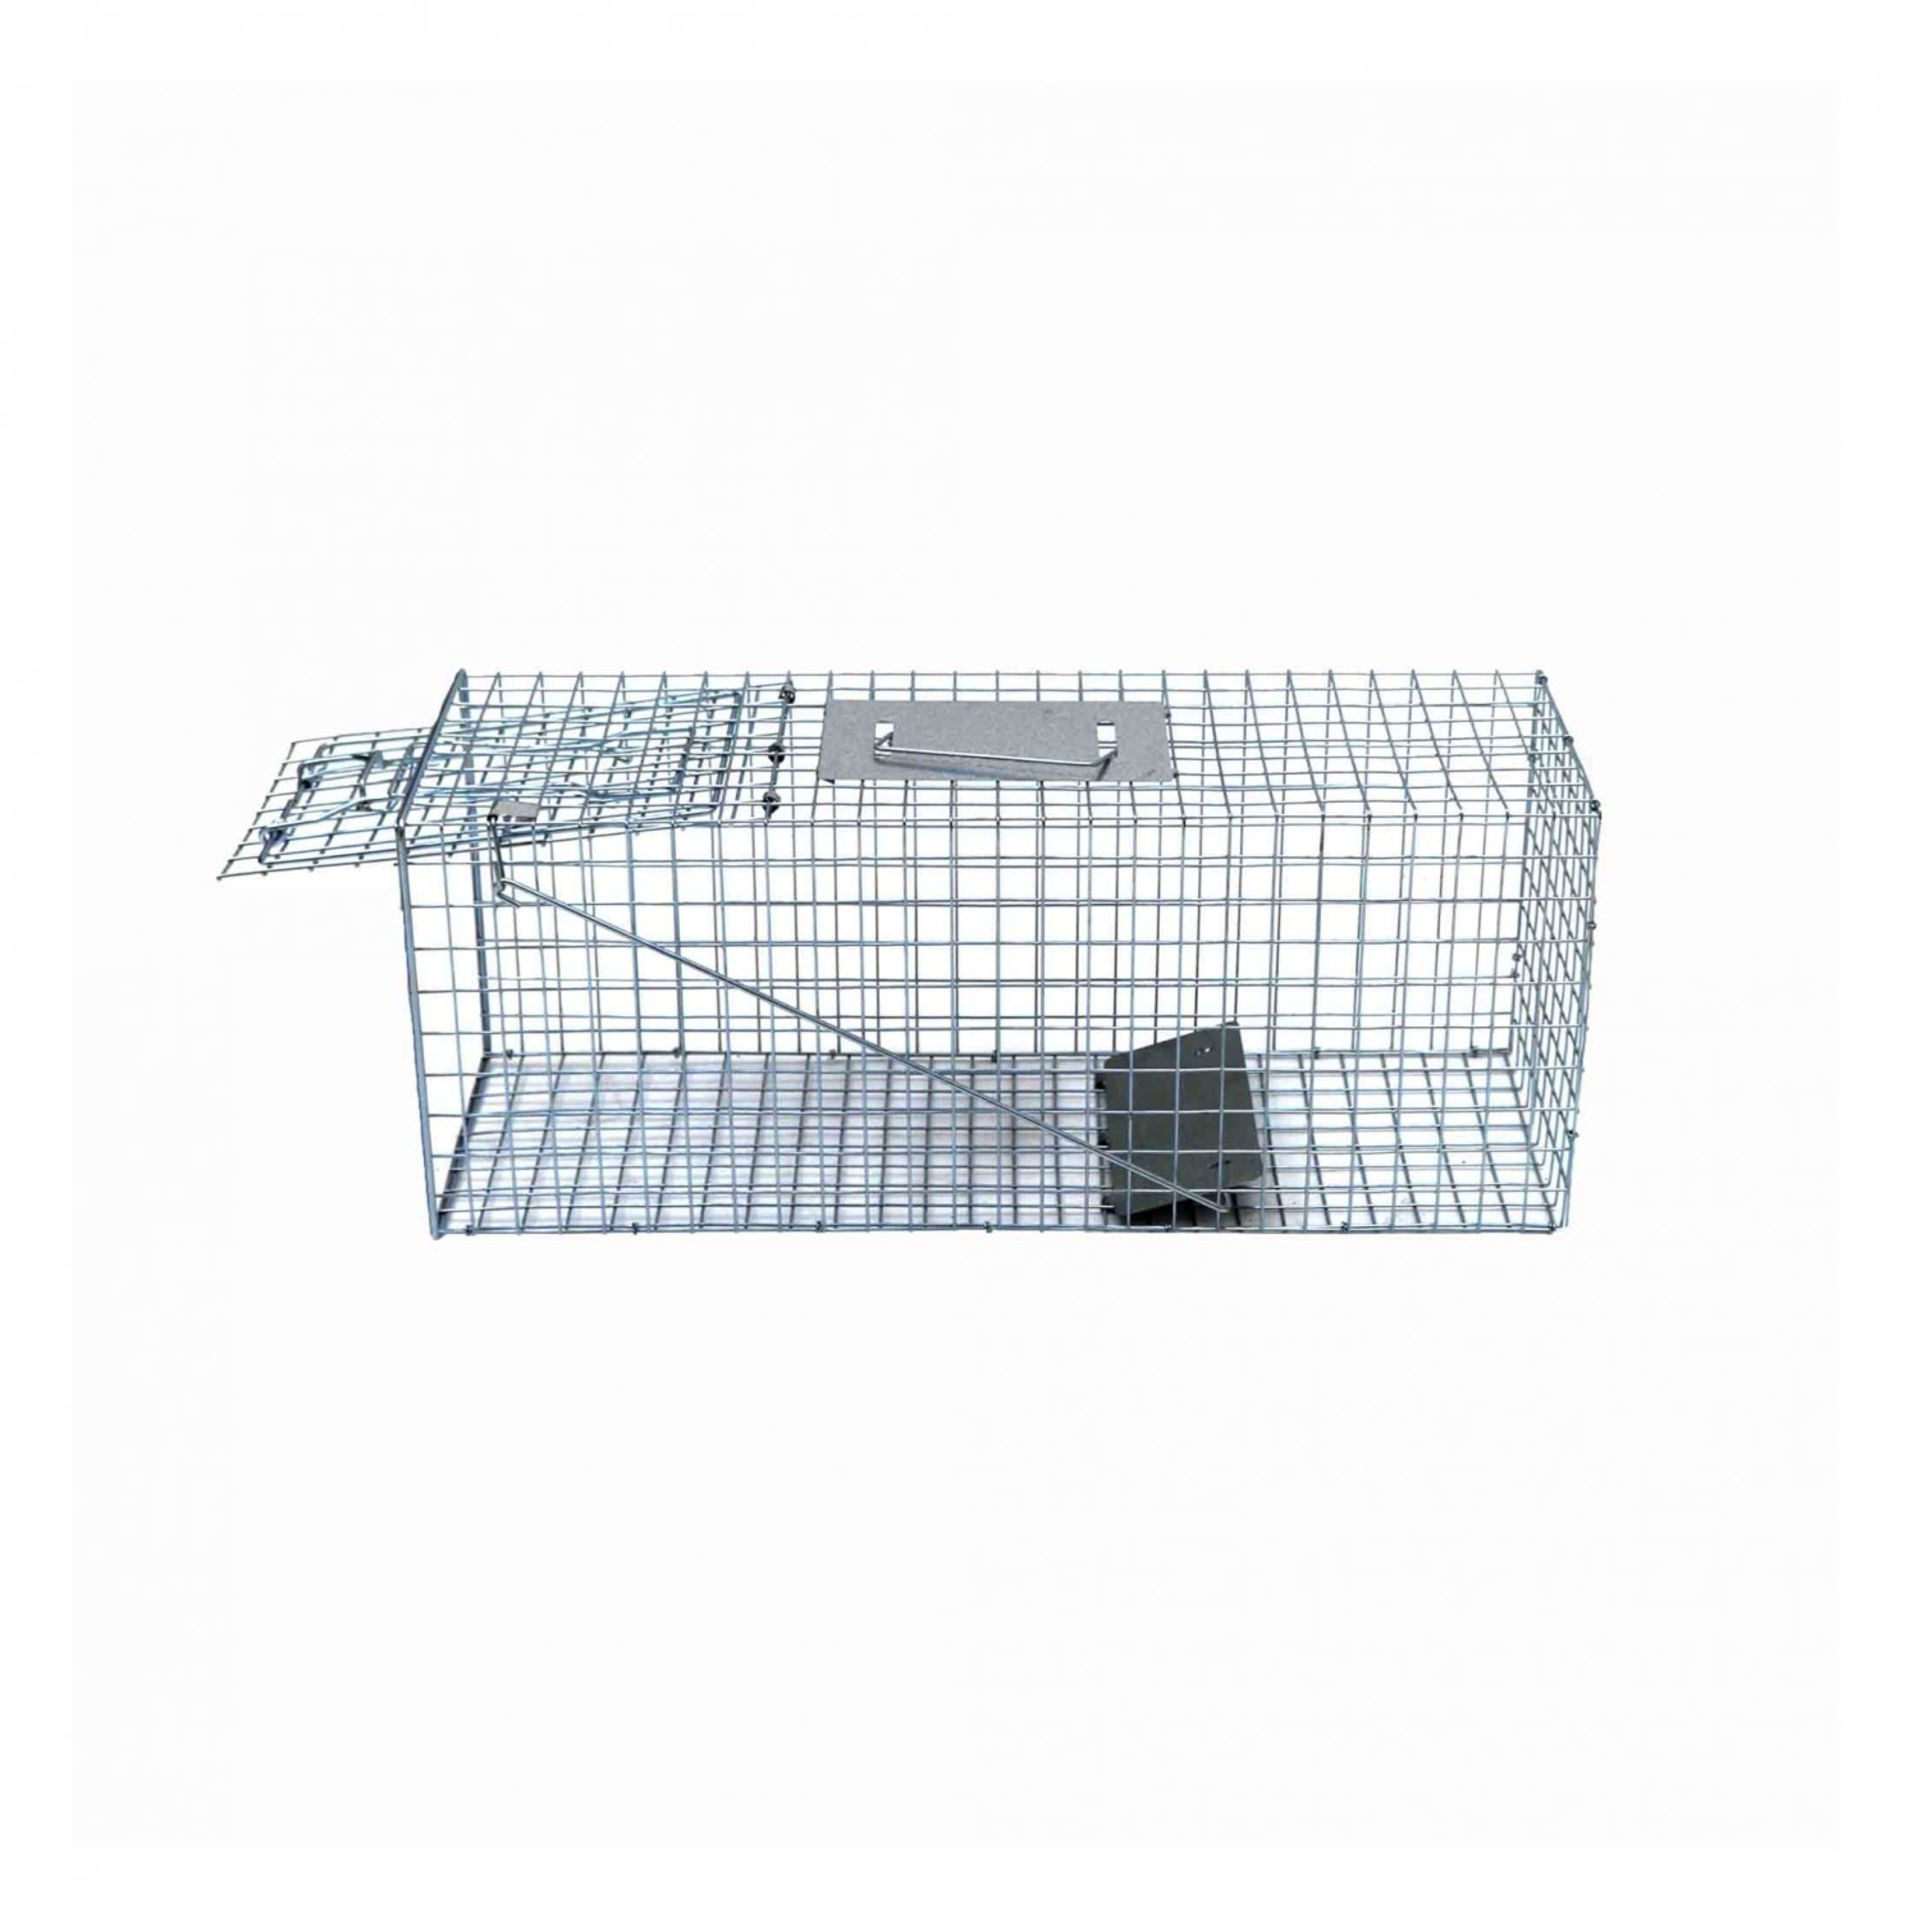 (LF49) Medium Humane Animal Rodent Rat Pest Trap Cage Our humane animal trap is fully a... - Image 2 of 2